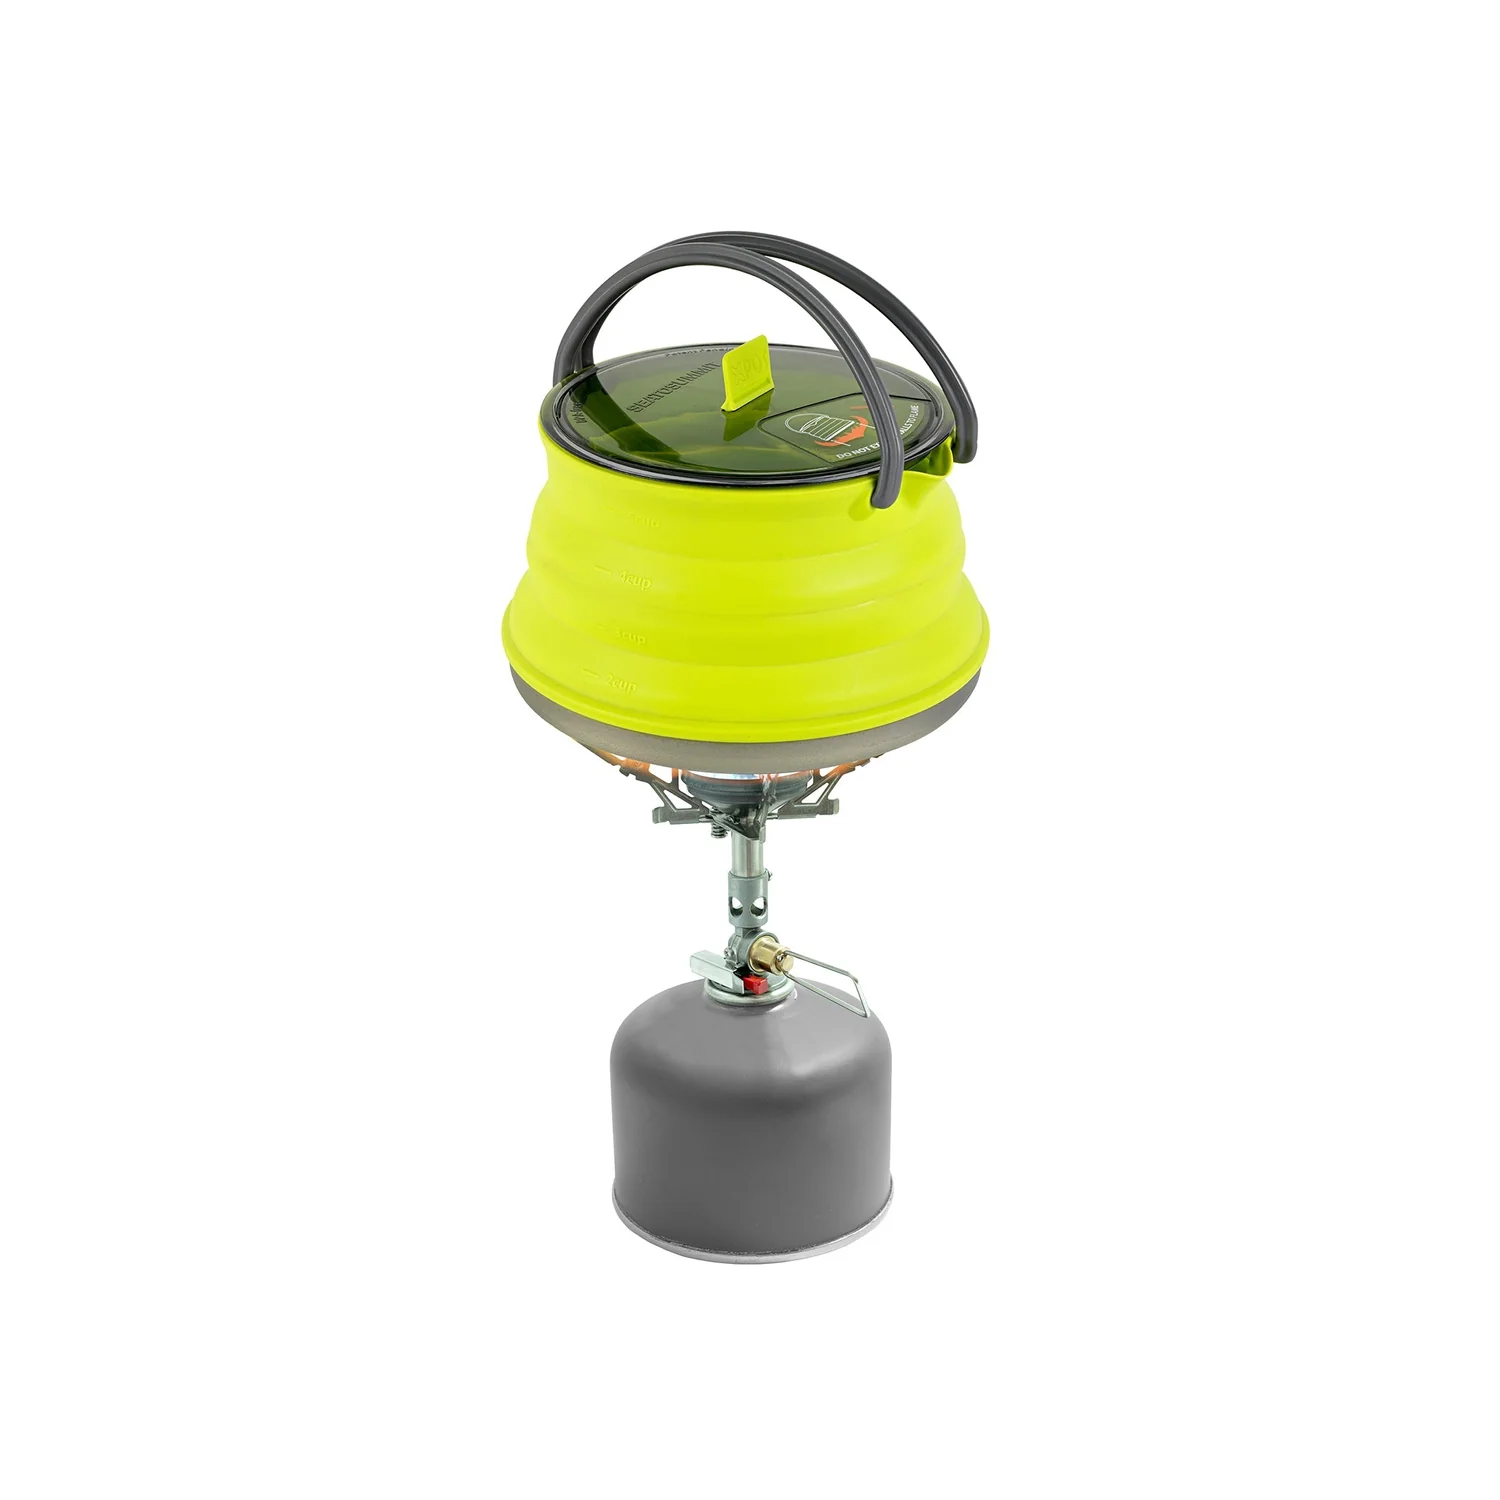 X_Kettle___1.3L___Lime_Green_On_Stove_d4121475-6222-4fea-9619-cfd9caa8fe84